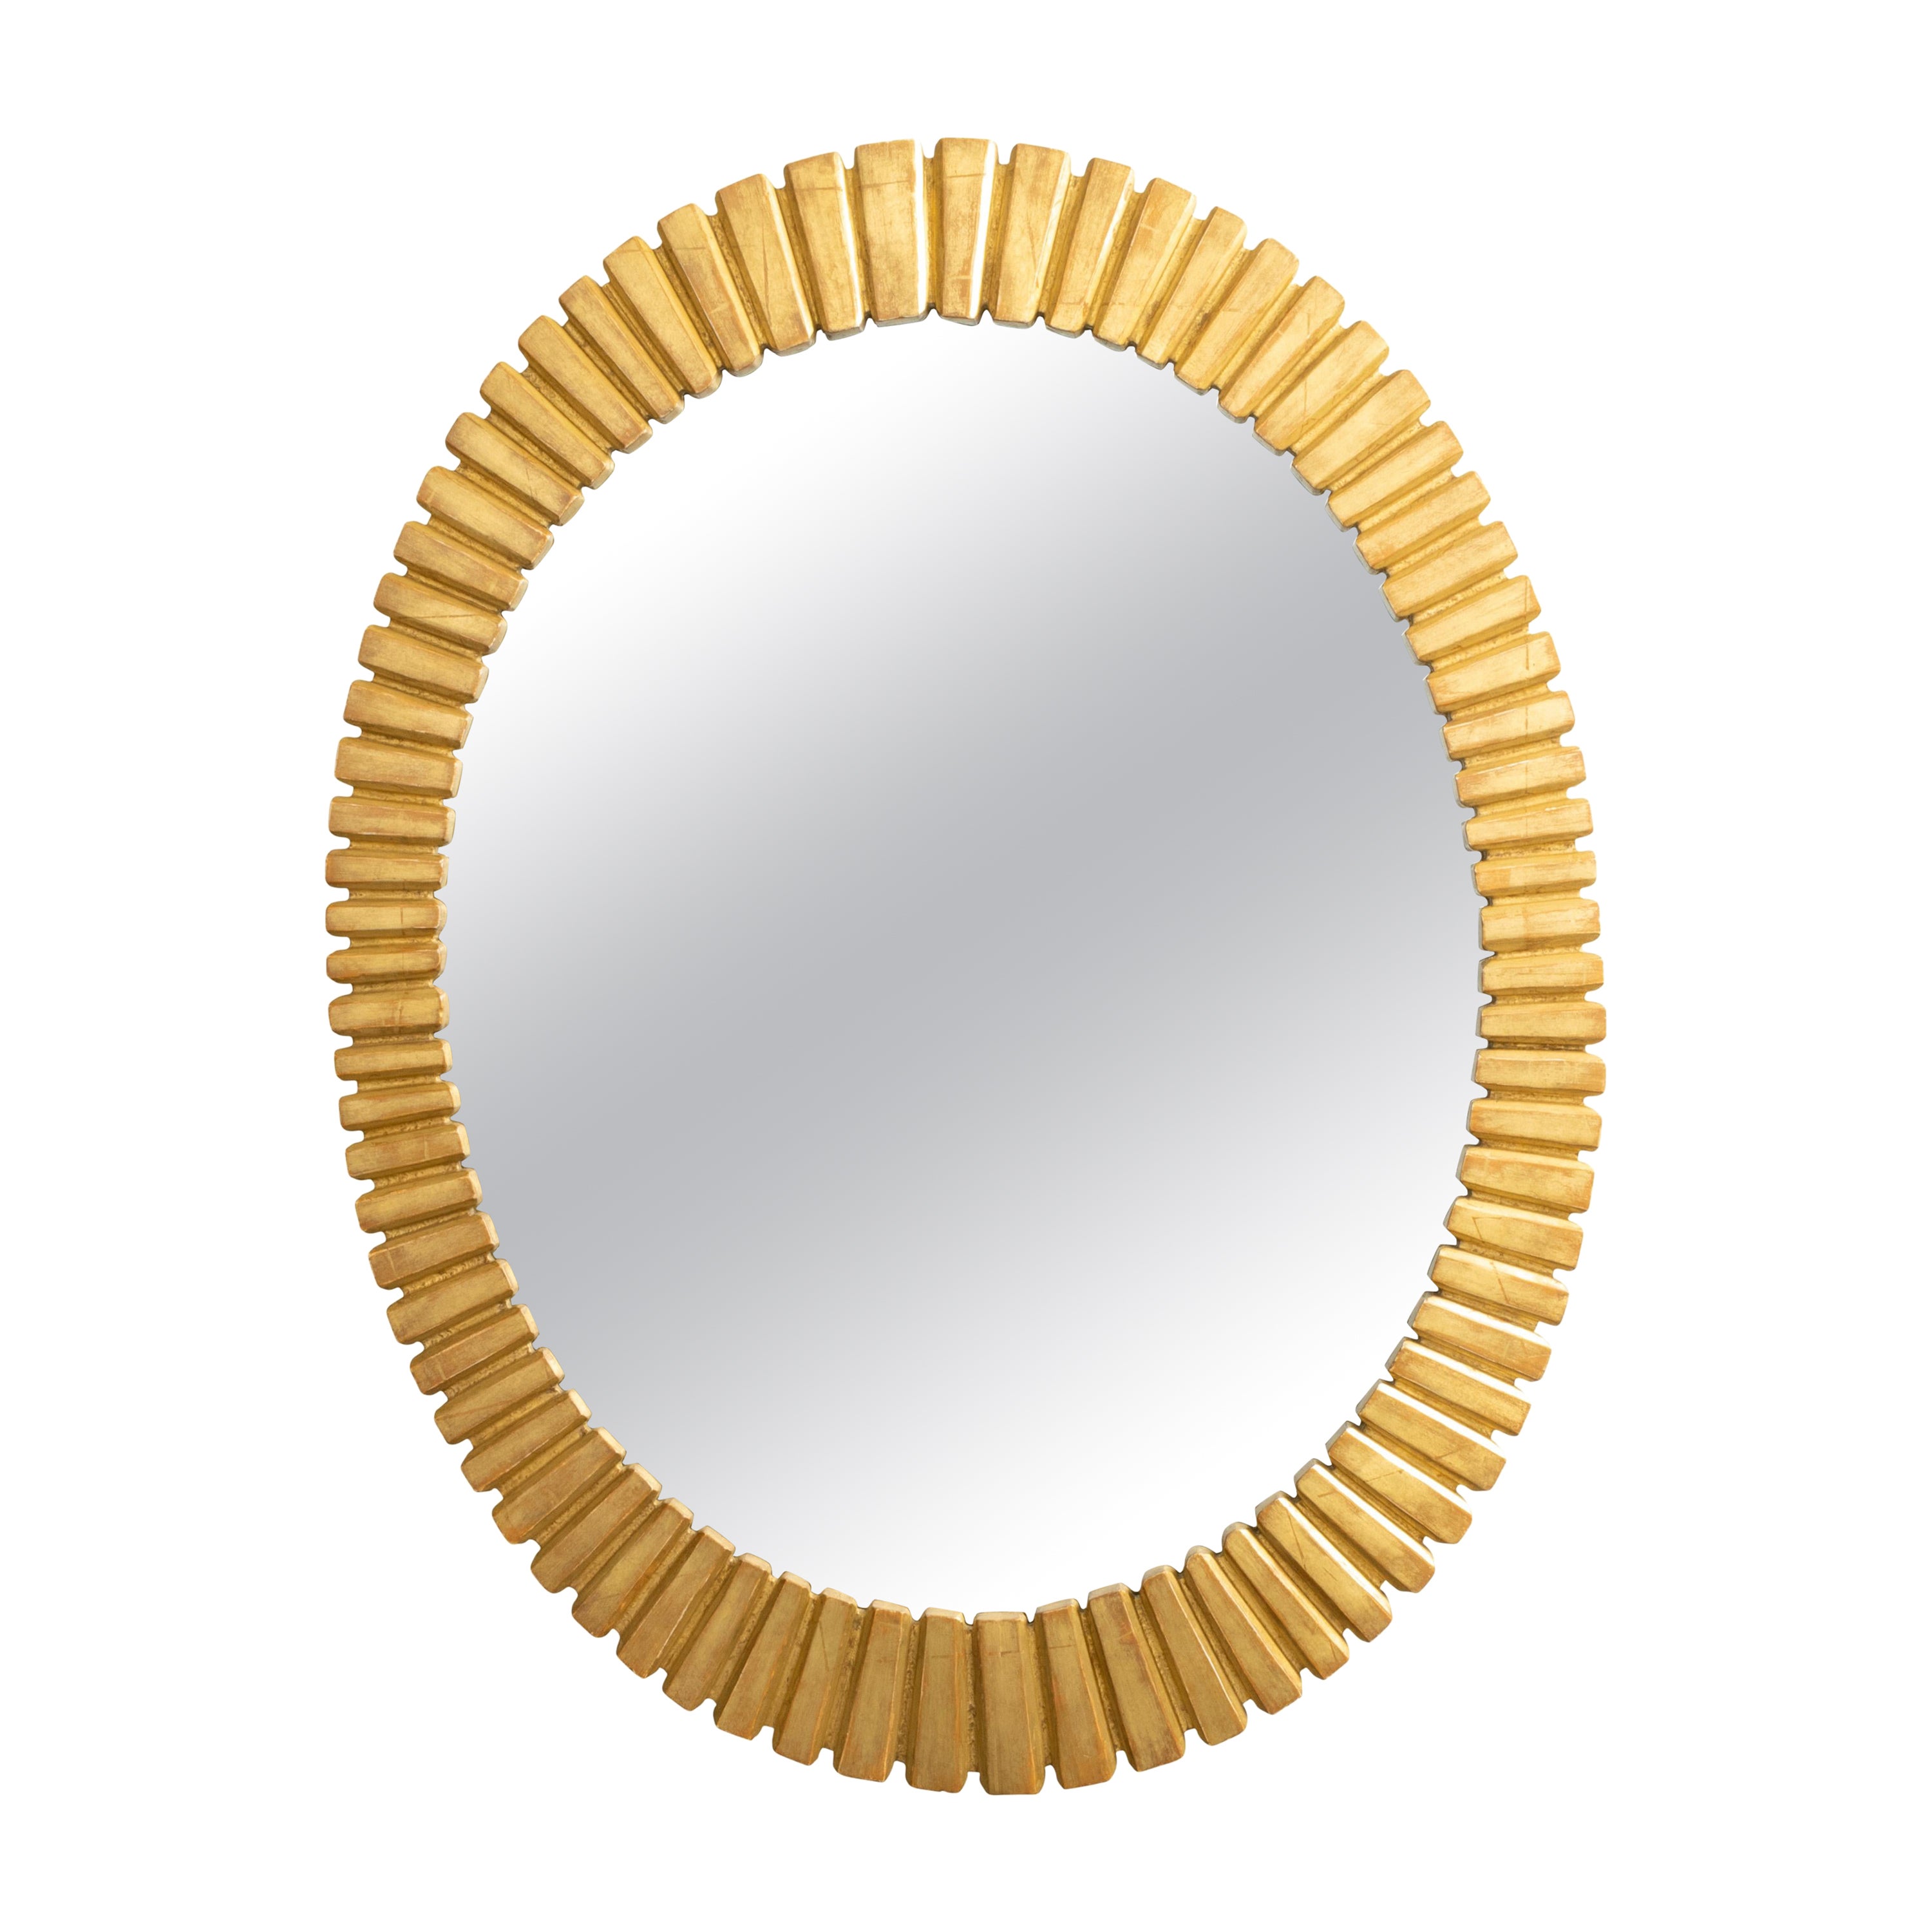 French Oval Midcentury Giltwood Mirror with Grooved Radiating Patterns For Sale